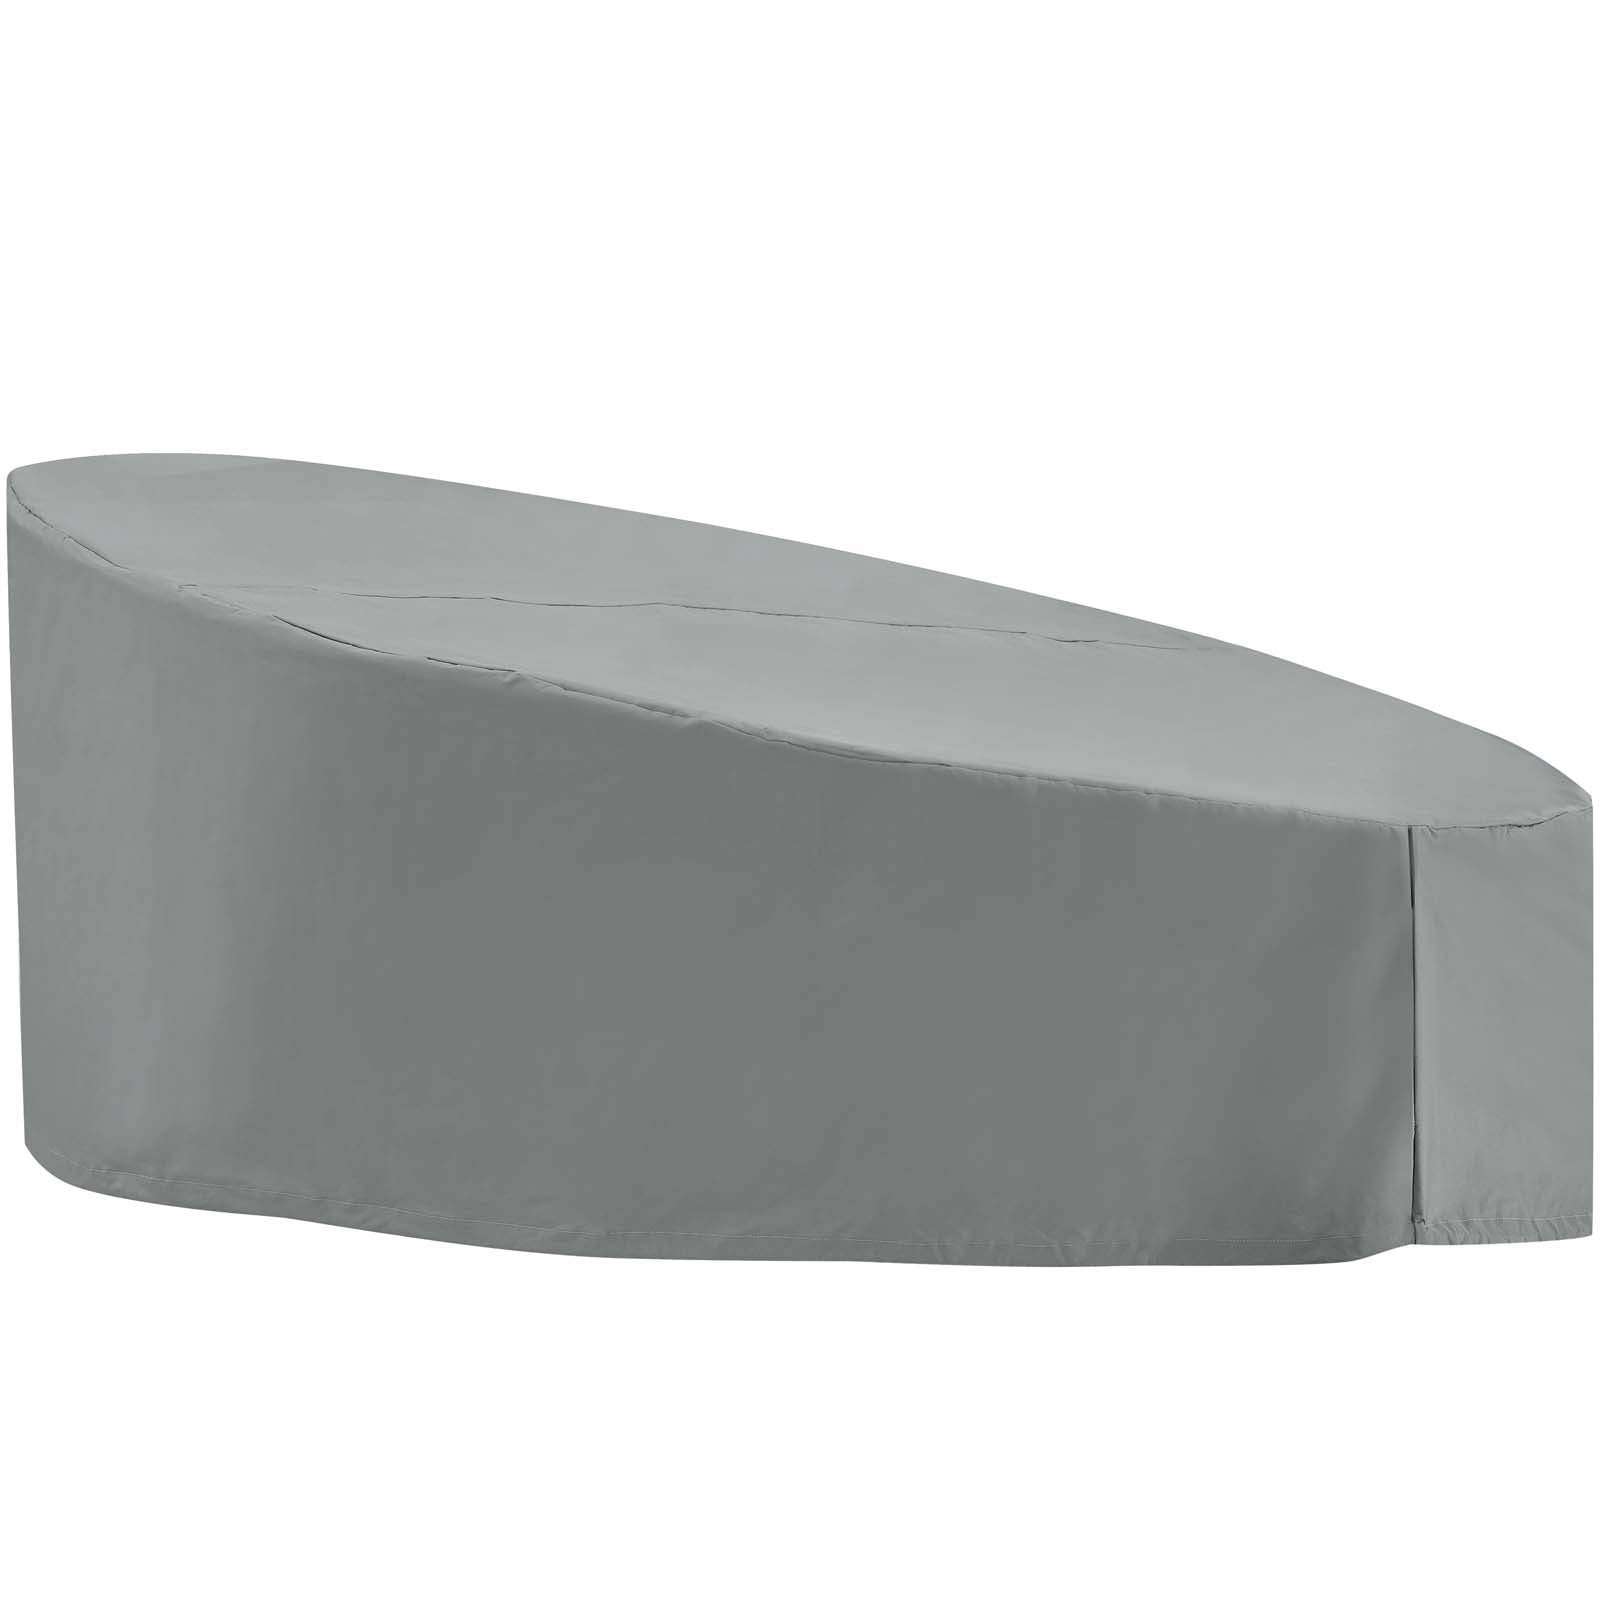 Immerse Taiji / Convene / Sojourn / Summon Daybed Outdoor Patio Furniture Cover - East Shore Modern Home Furnishings